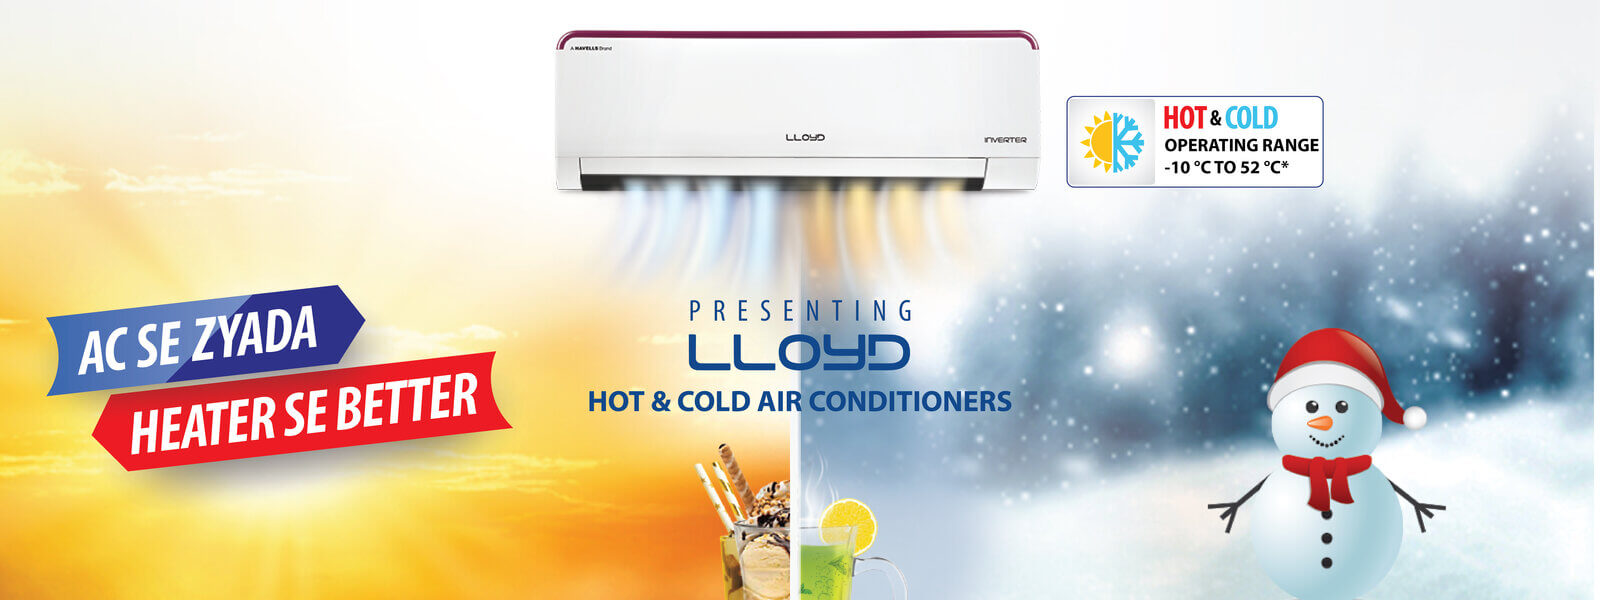 Hot and Cold AC 